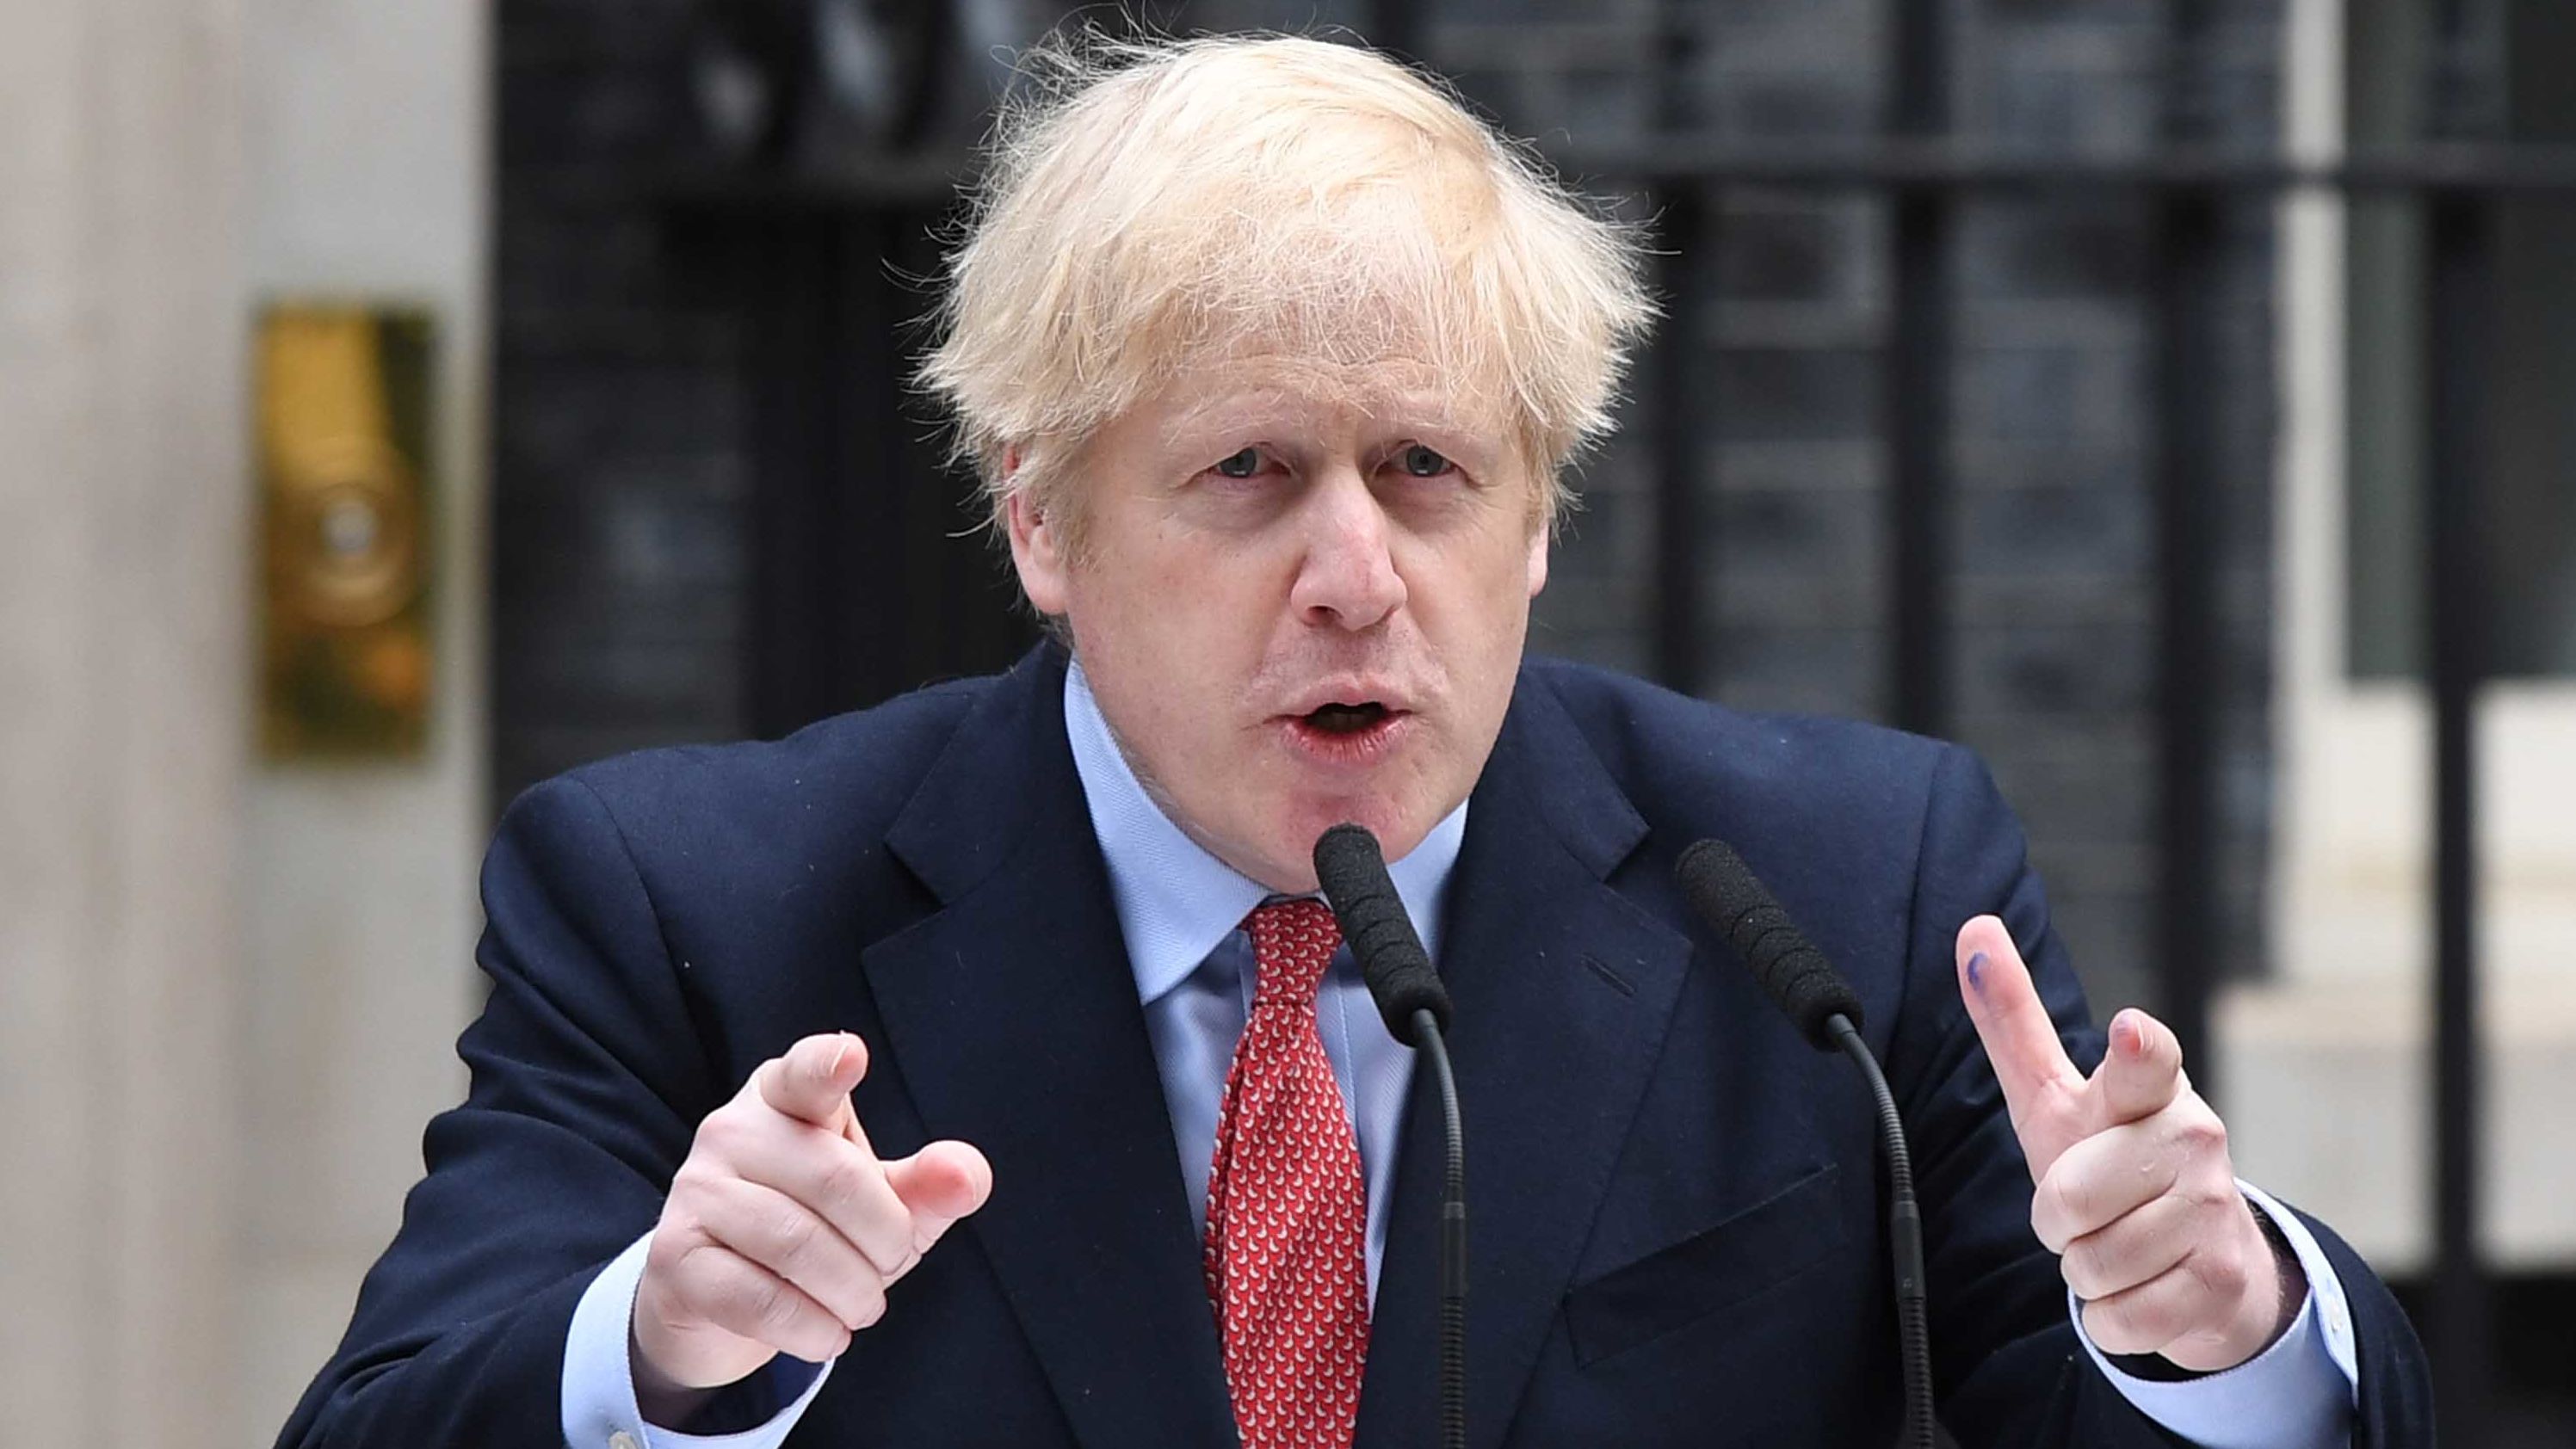 After recovering from the coronavirus, Johnson <a href="https://edition.cnn.com/2020/04/27/uk/boris-johnson-downing-street-speech-return-intl-gbr/index.html" target="_blank">returned to work</a> in late April 2020.